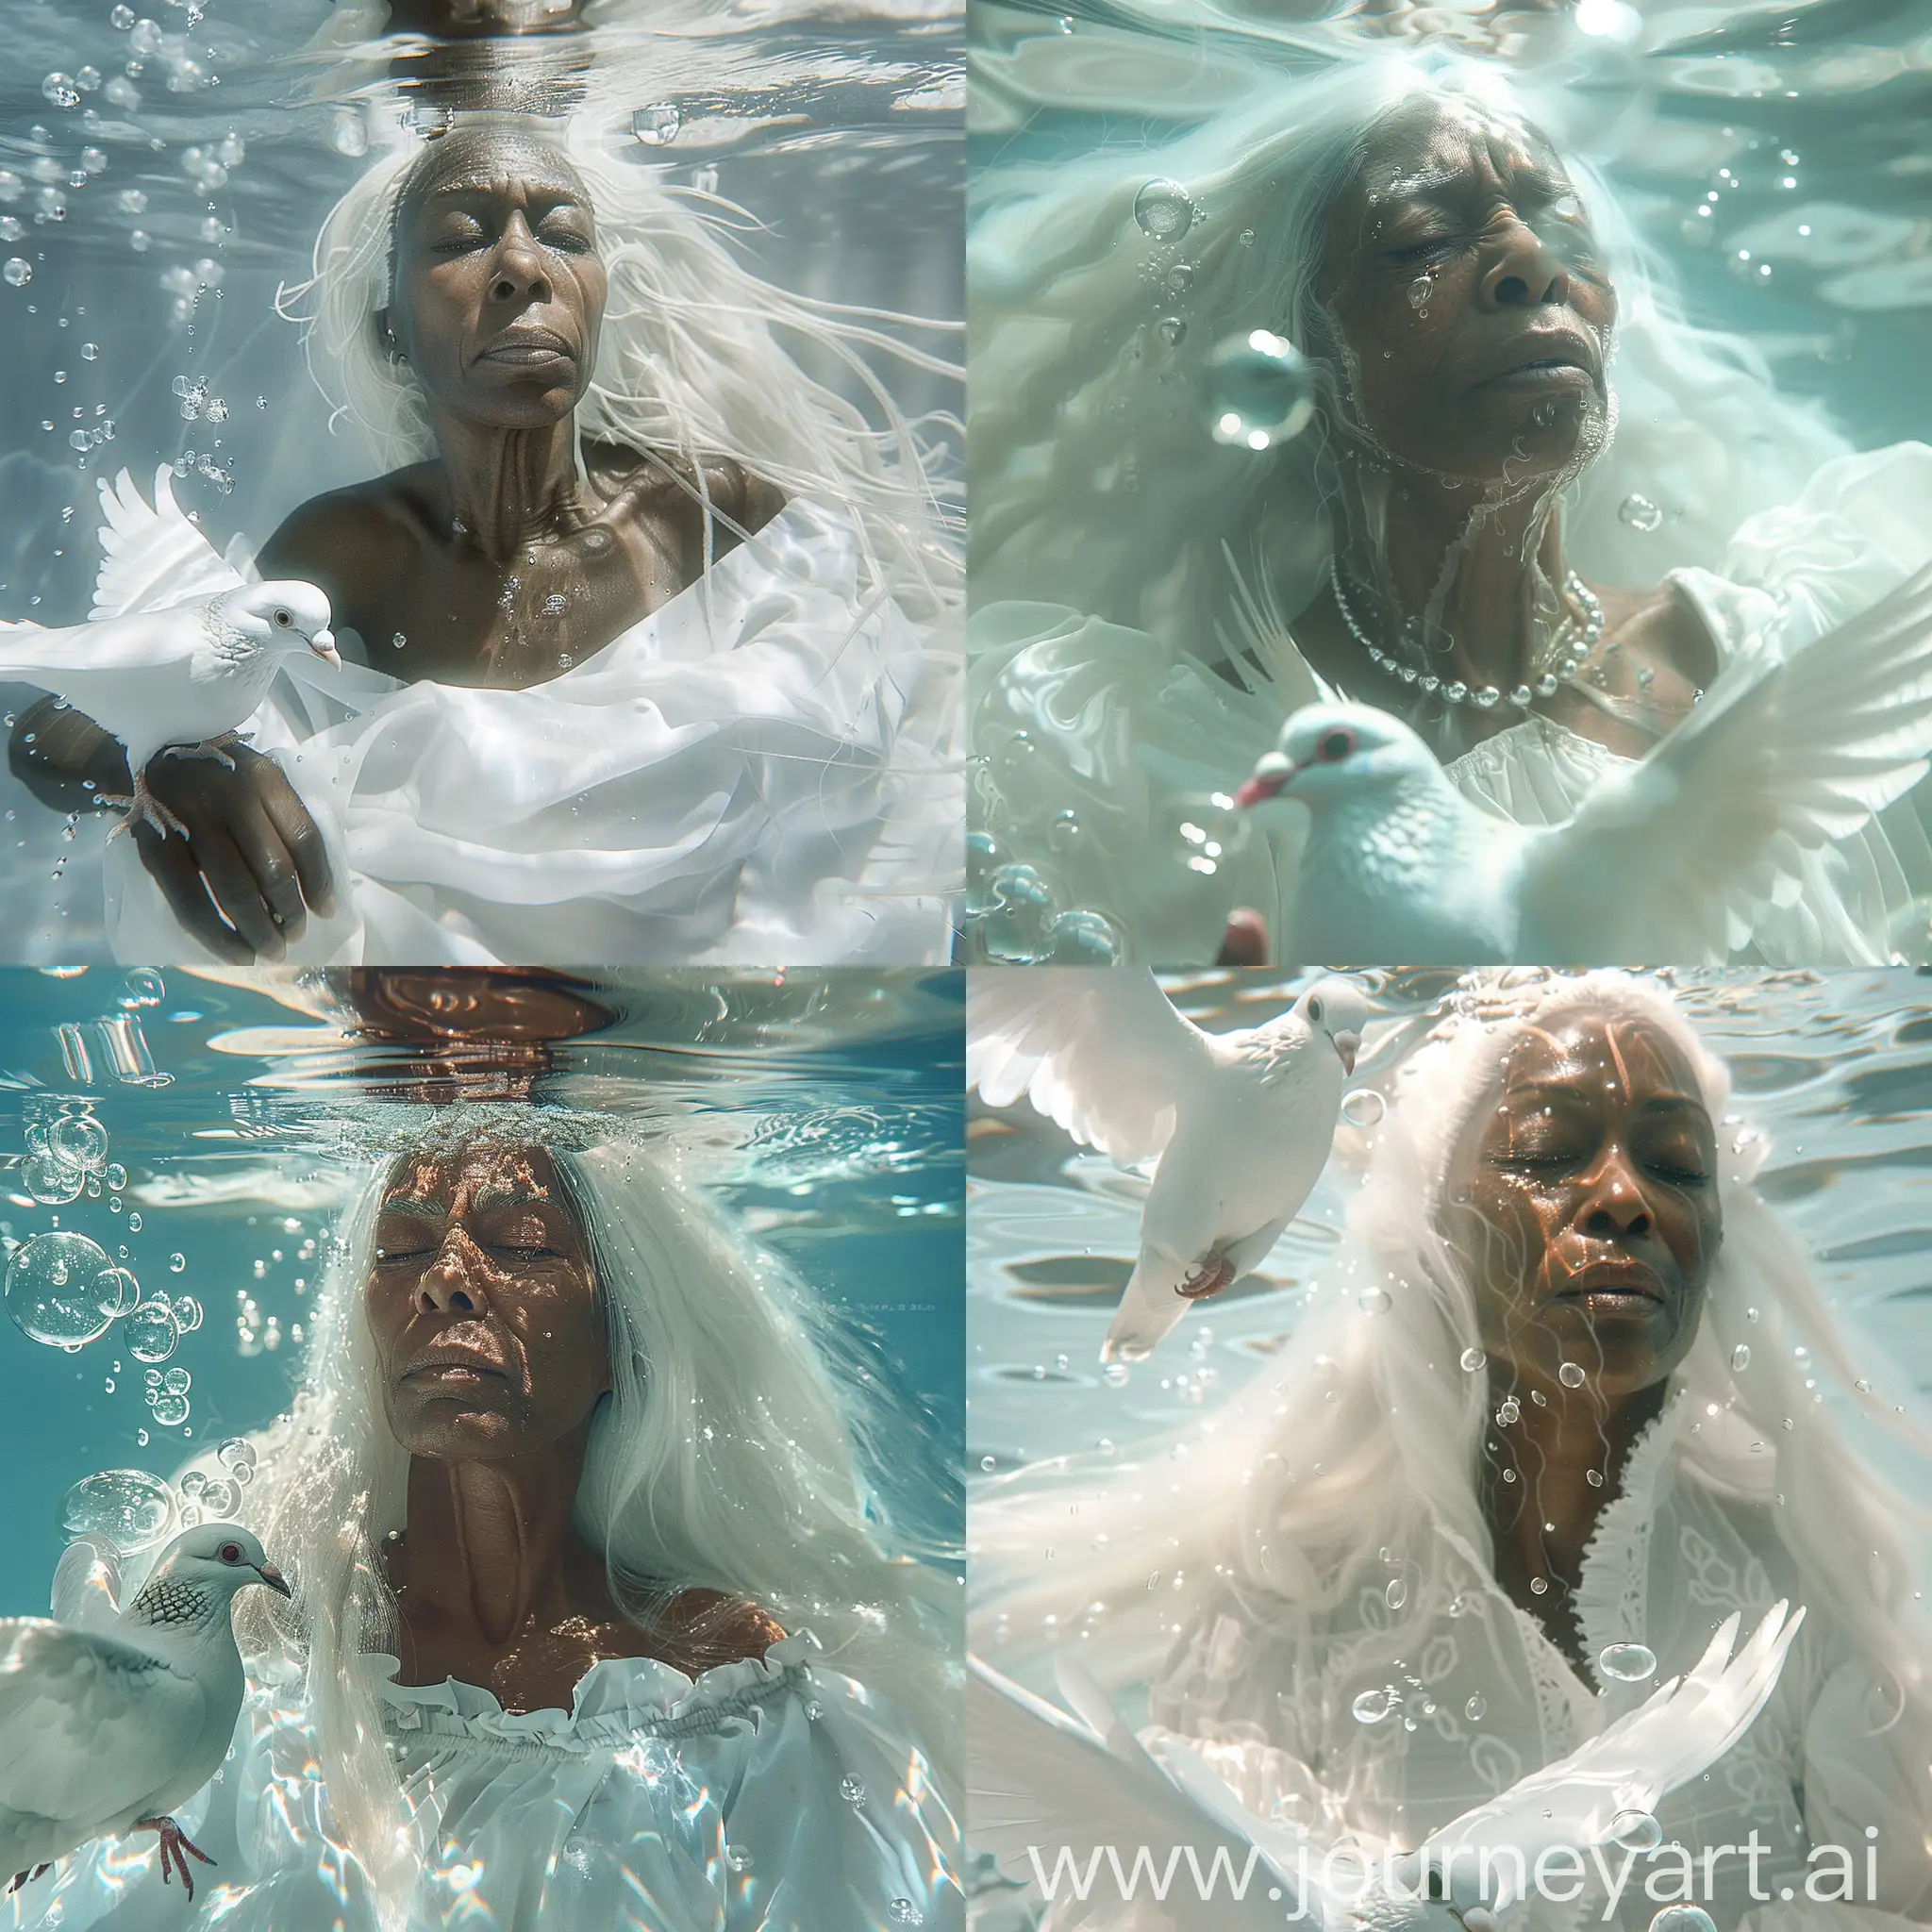 Emotional-Black-Woman-with-White-Hair-Submerged-Serenity-and-Reflection